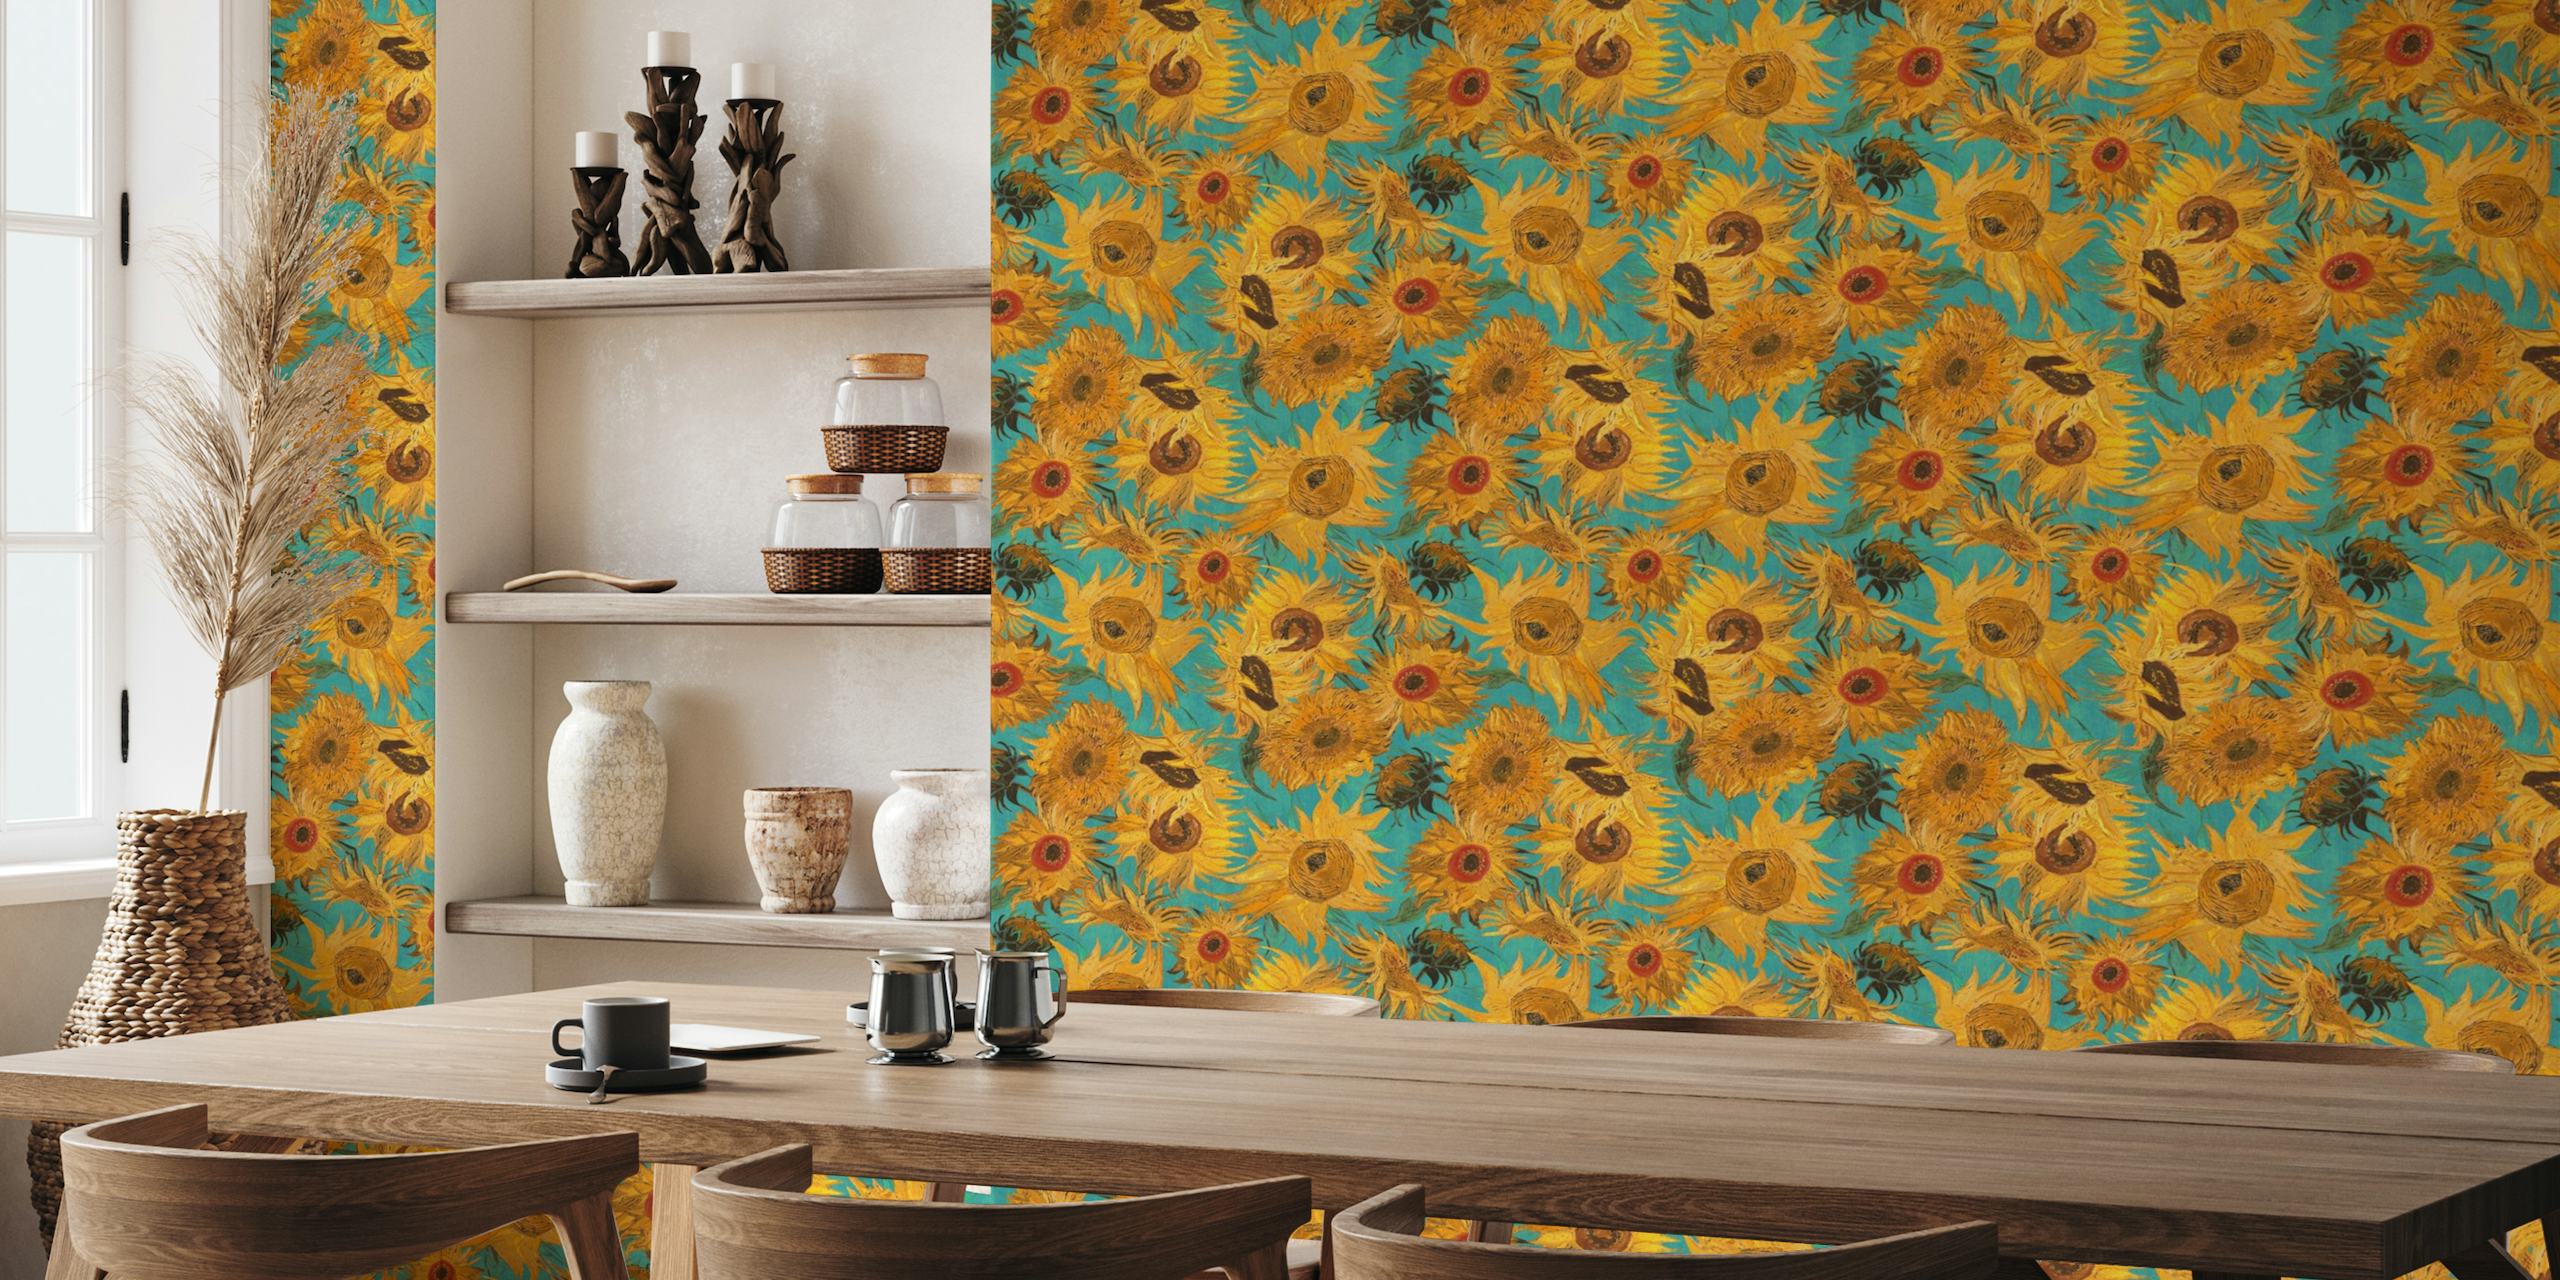 Van Gogh Sunflowers Pattern in yellow, teal, green, ochre and red tapetit